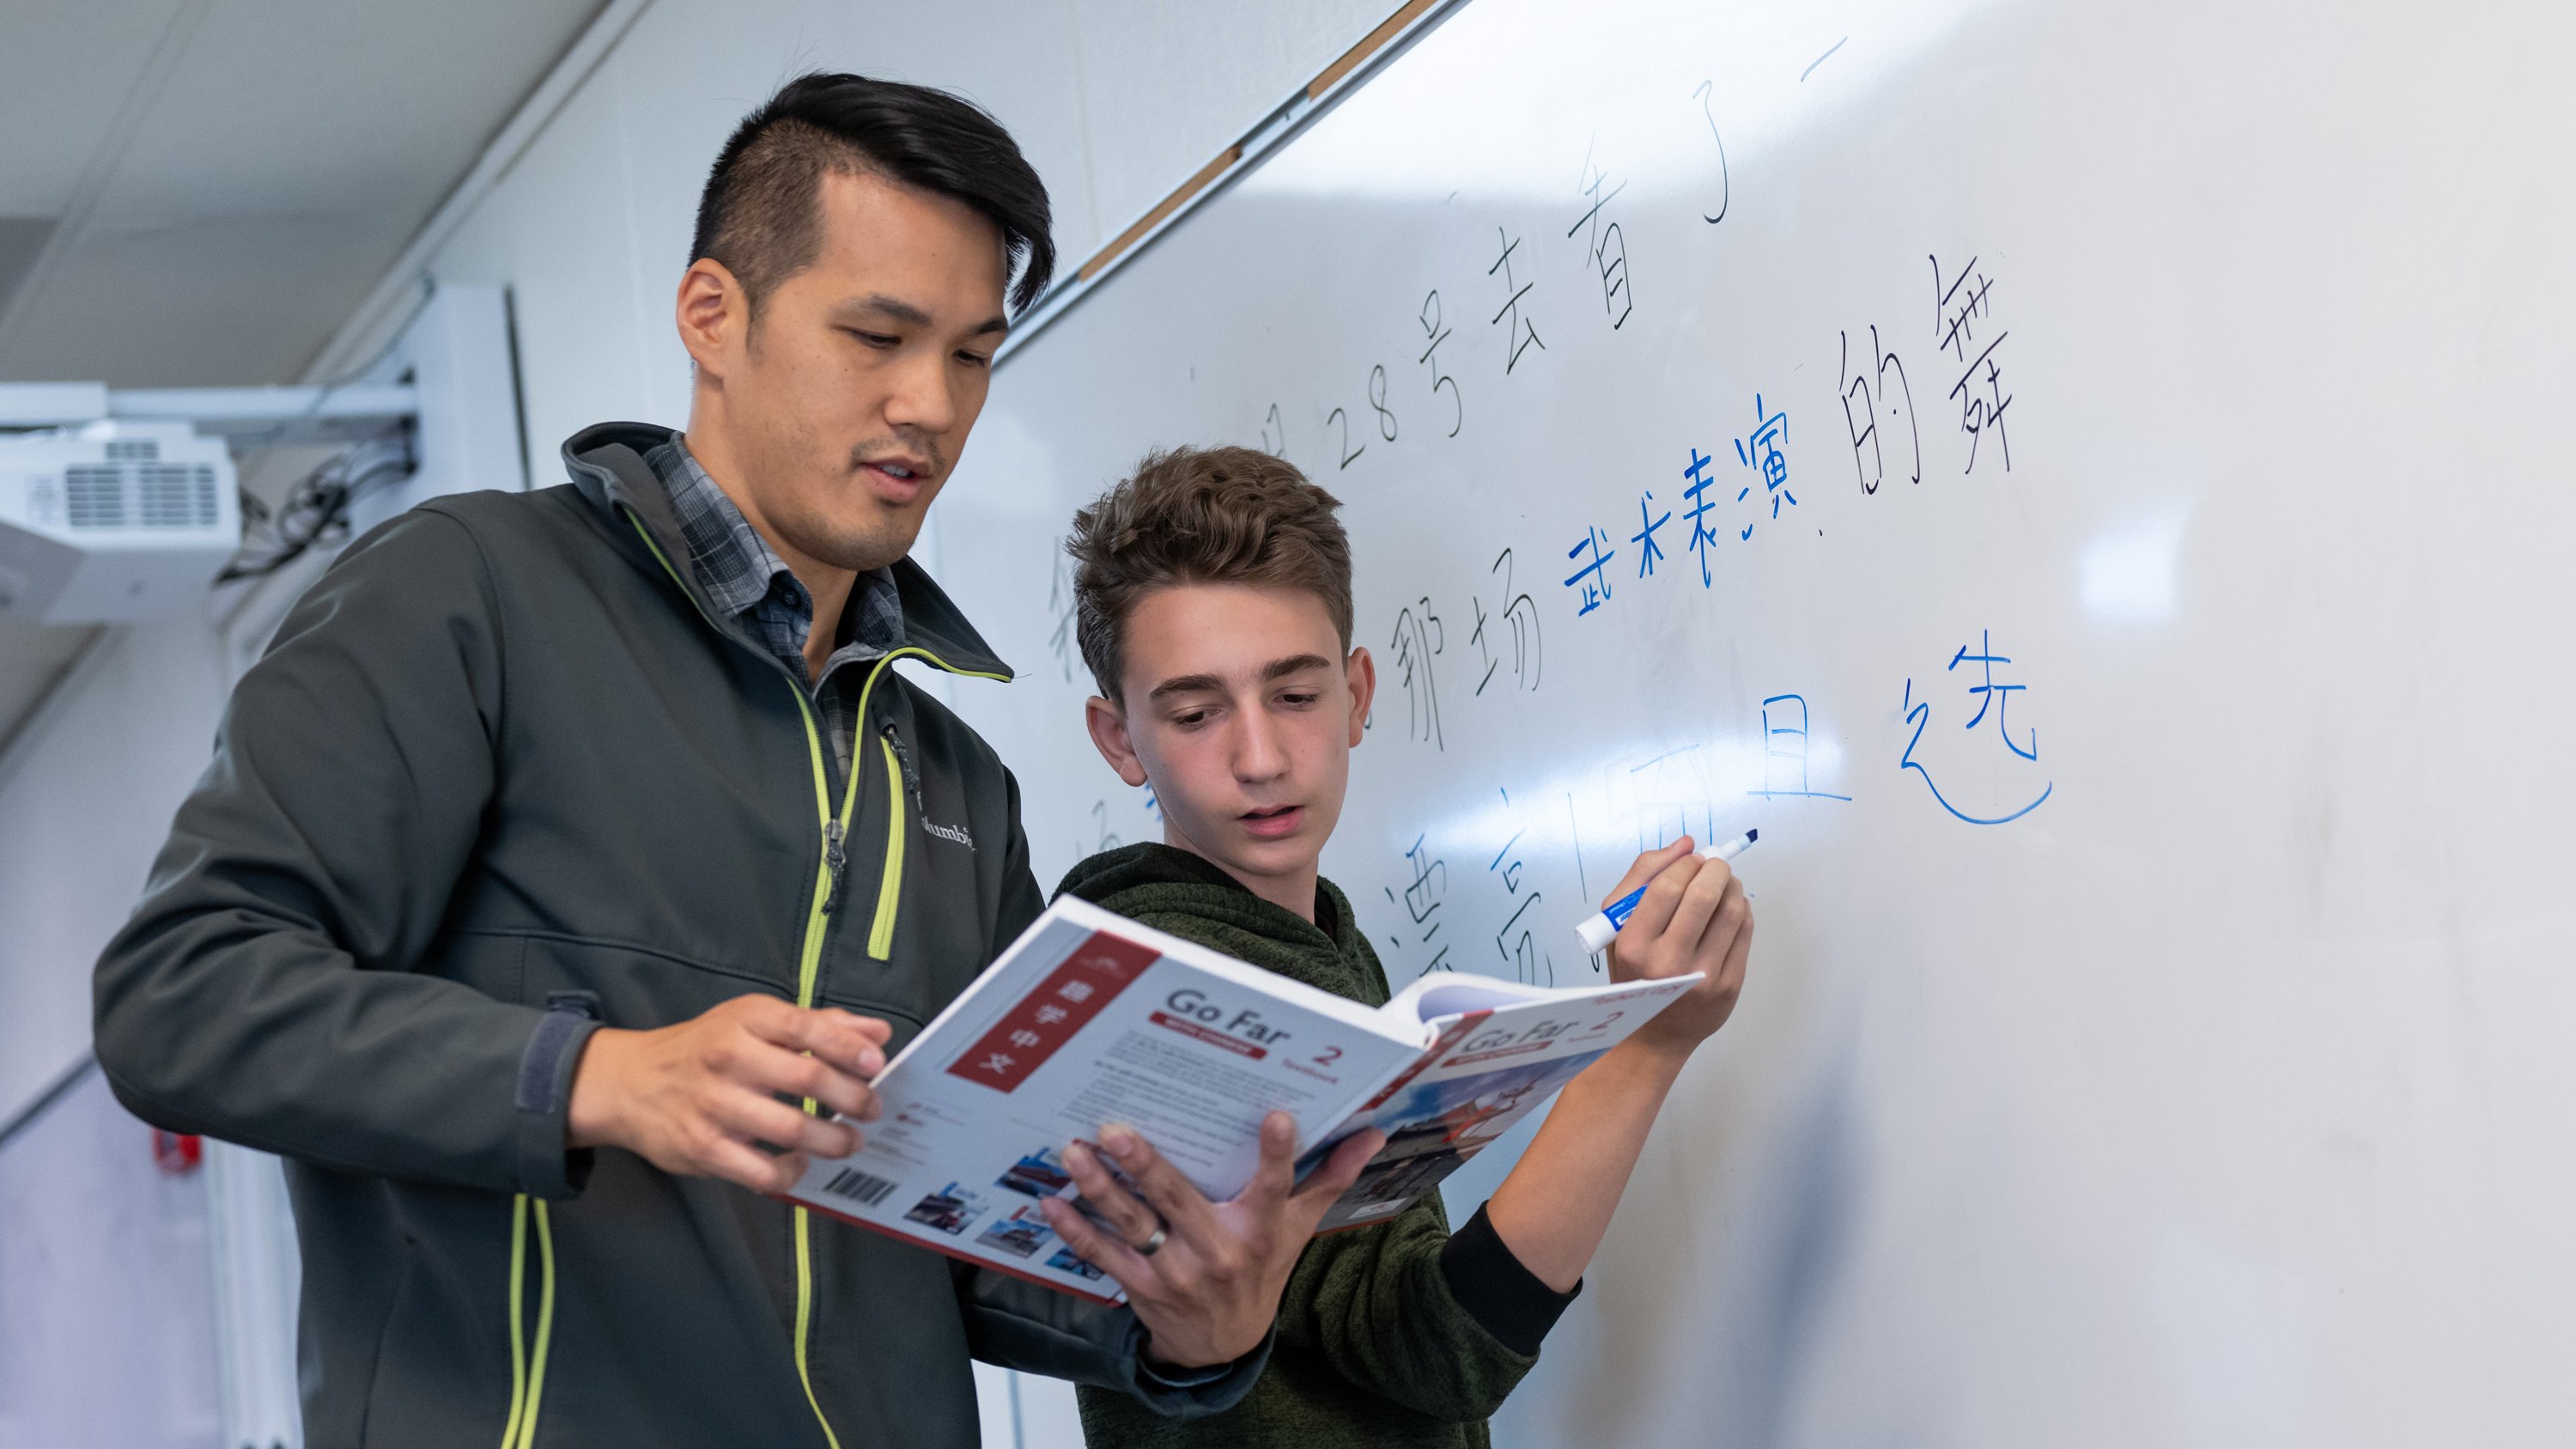 Chinese Middle Schooler working at the white board with his teacher.